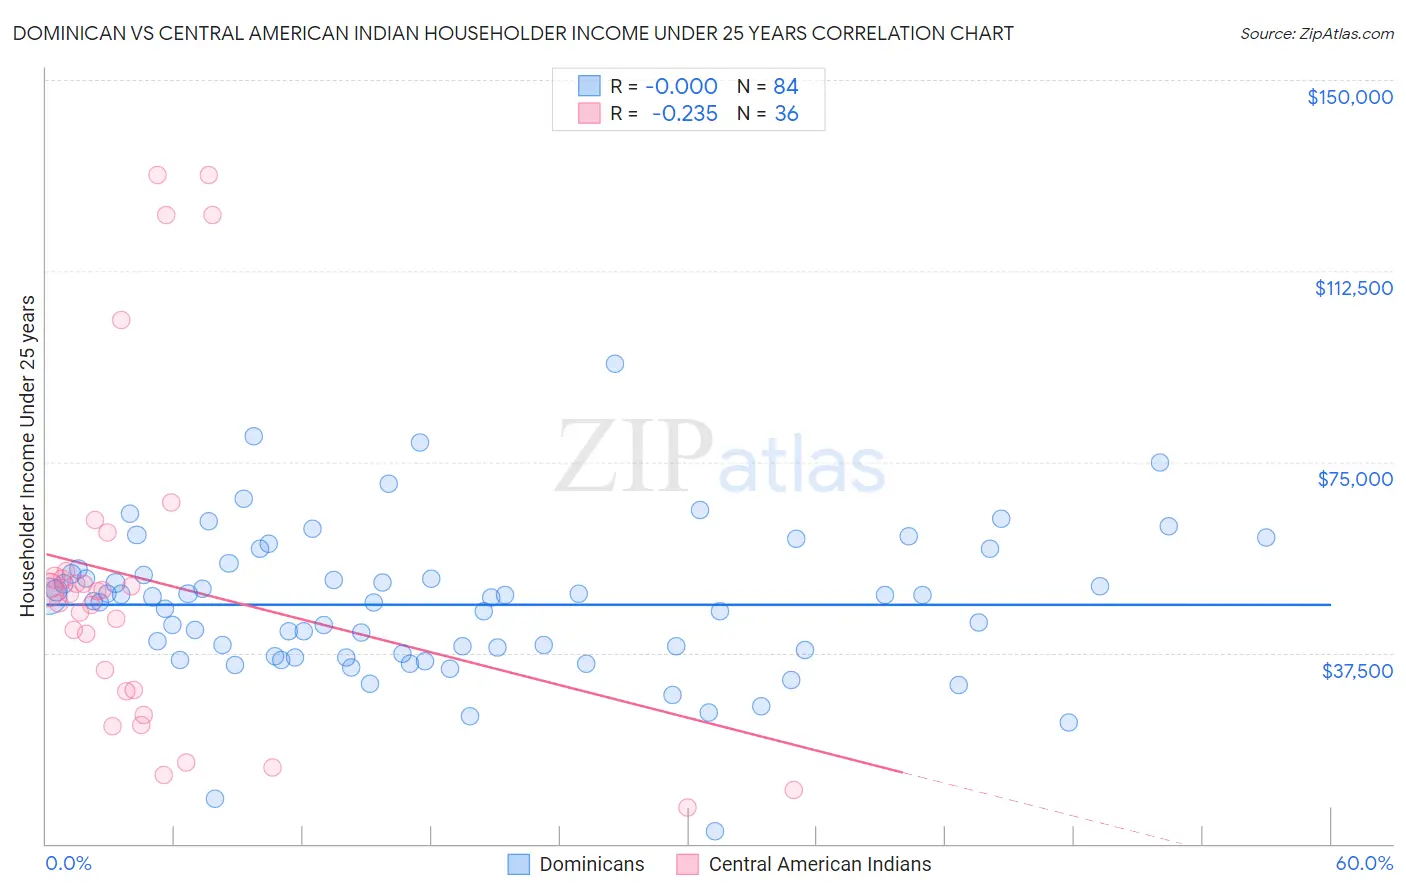 Dominican vs Central American Indian Householder Income Under 25 years